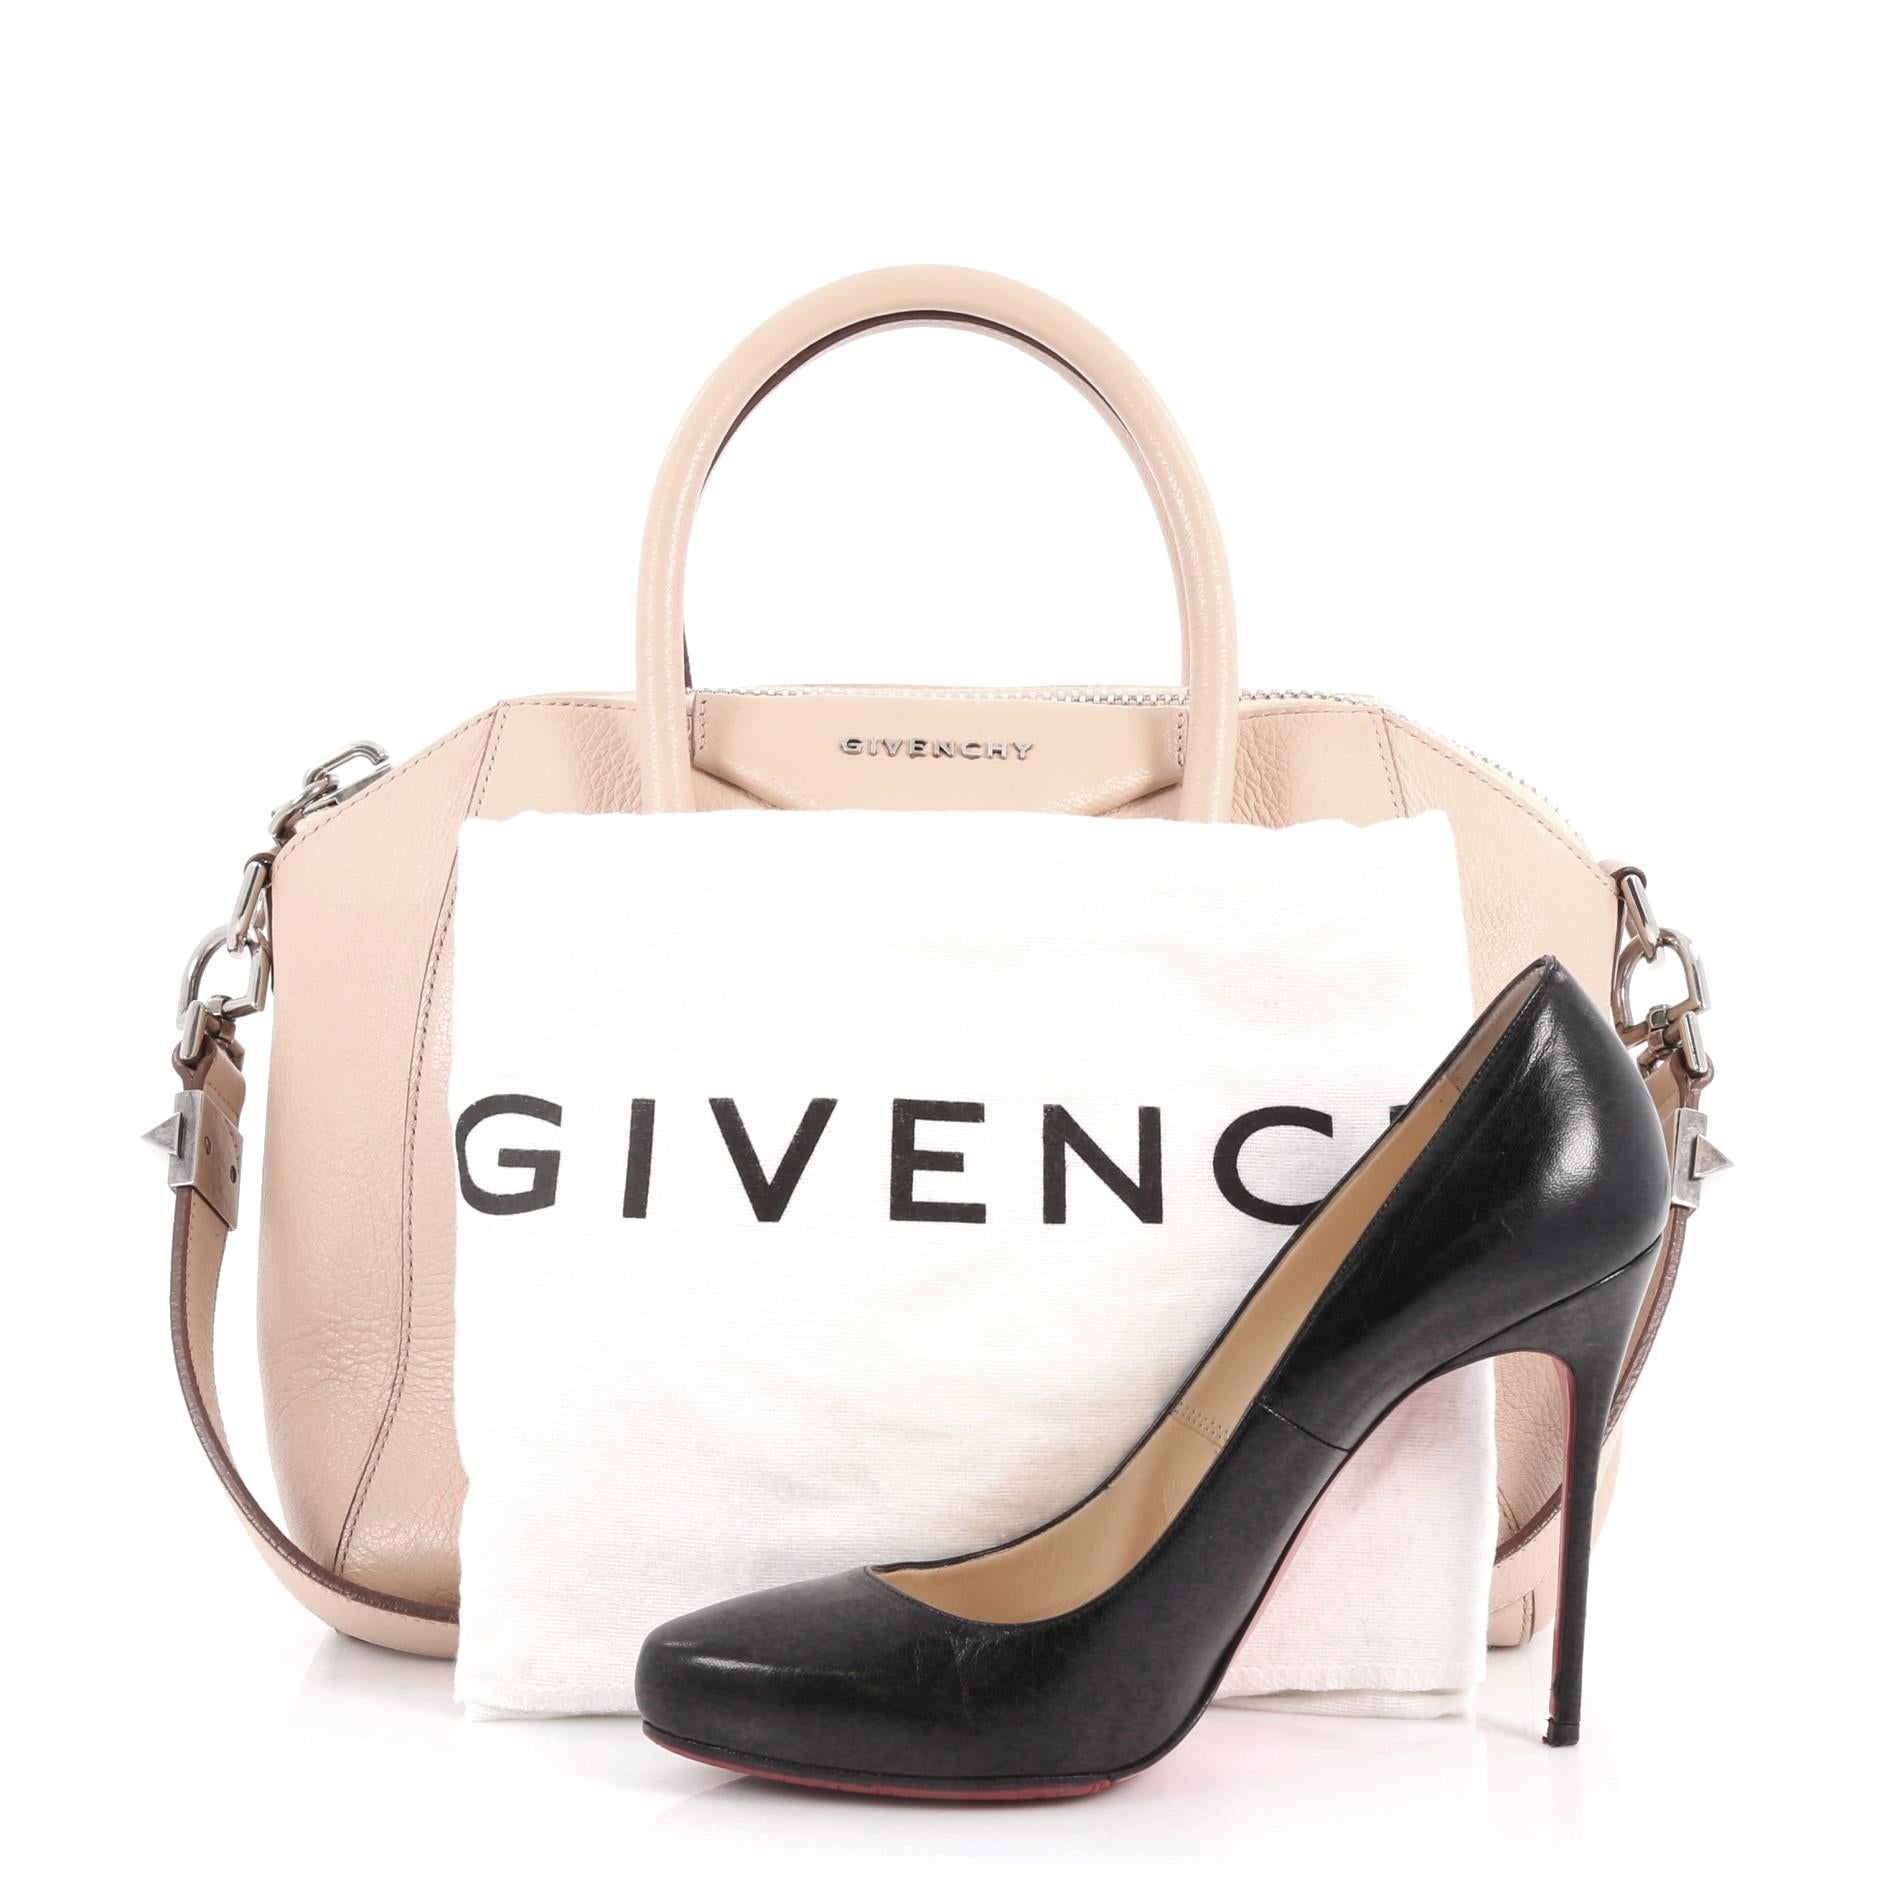 This authentic Givenchy Antigona Bag Leather Small combines style and functionality all-in-one. Crafted from blush pink leather, this structured handle bag is designed with dual-rolled leather handles and silver-tone hardware accents. The bag's zip